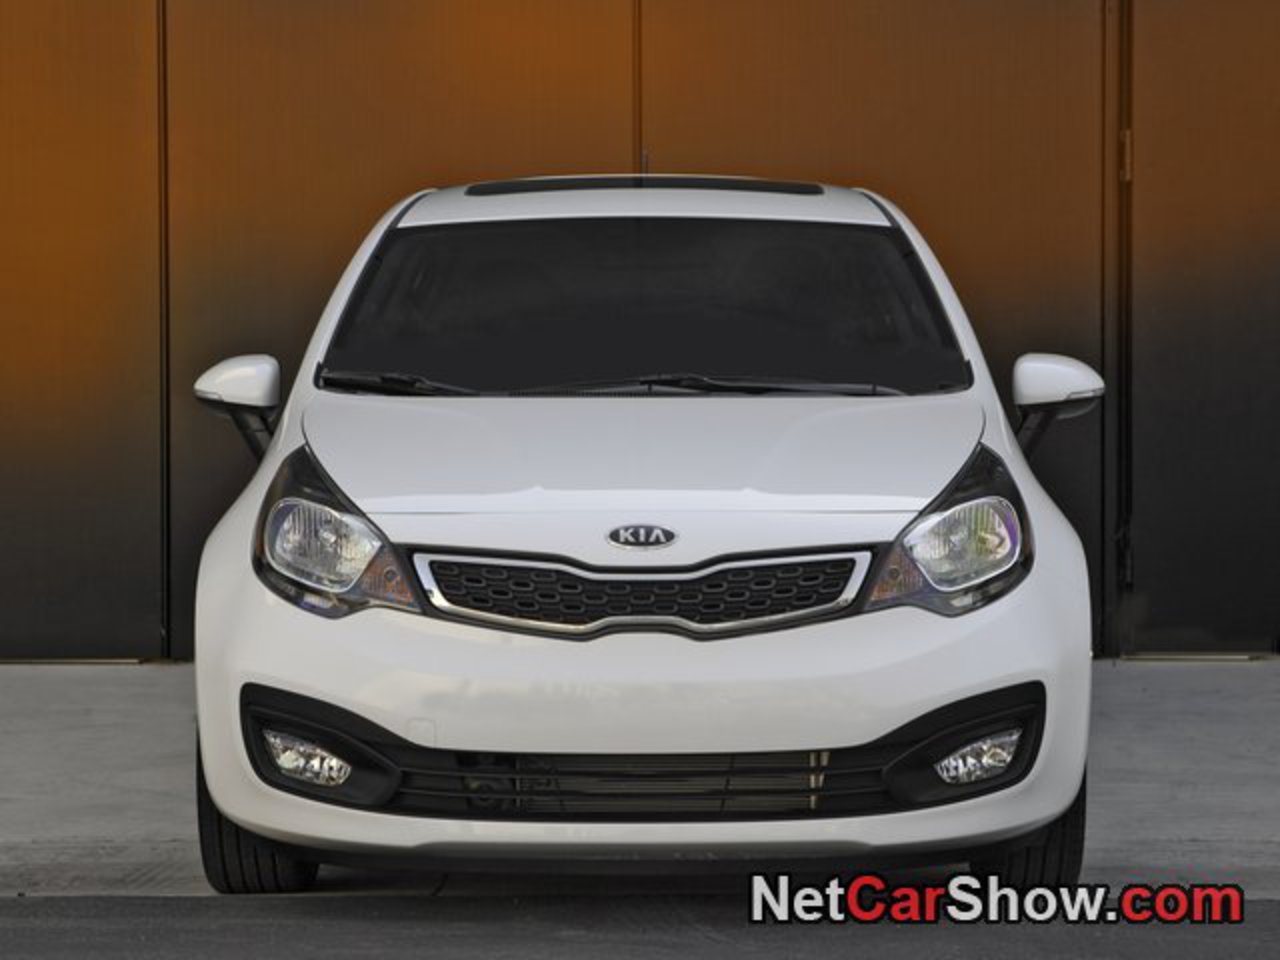 kia rio related images,101 to 150 - Zuoda Images